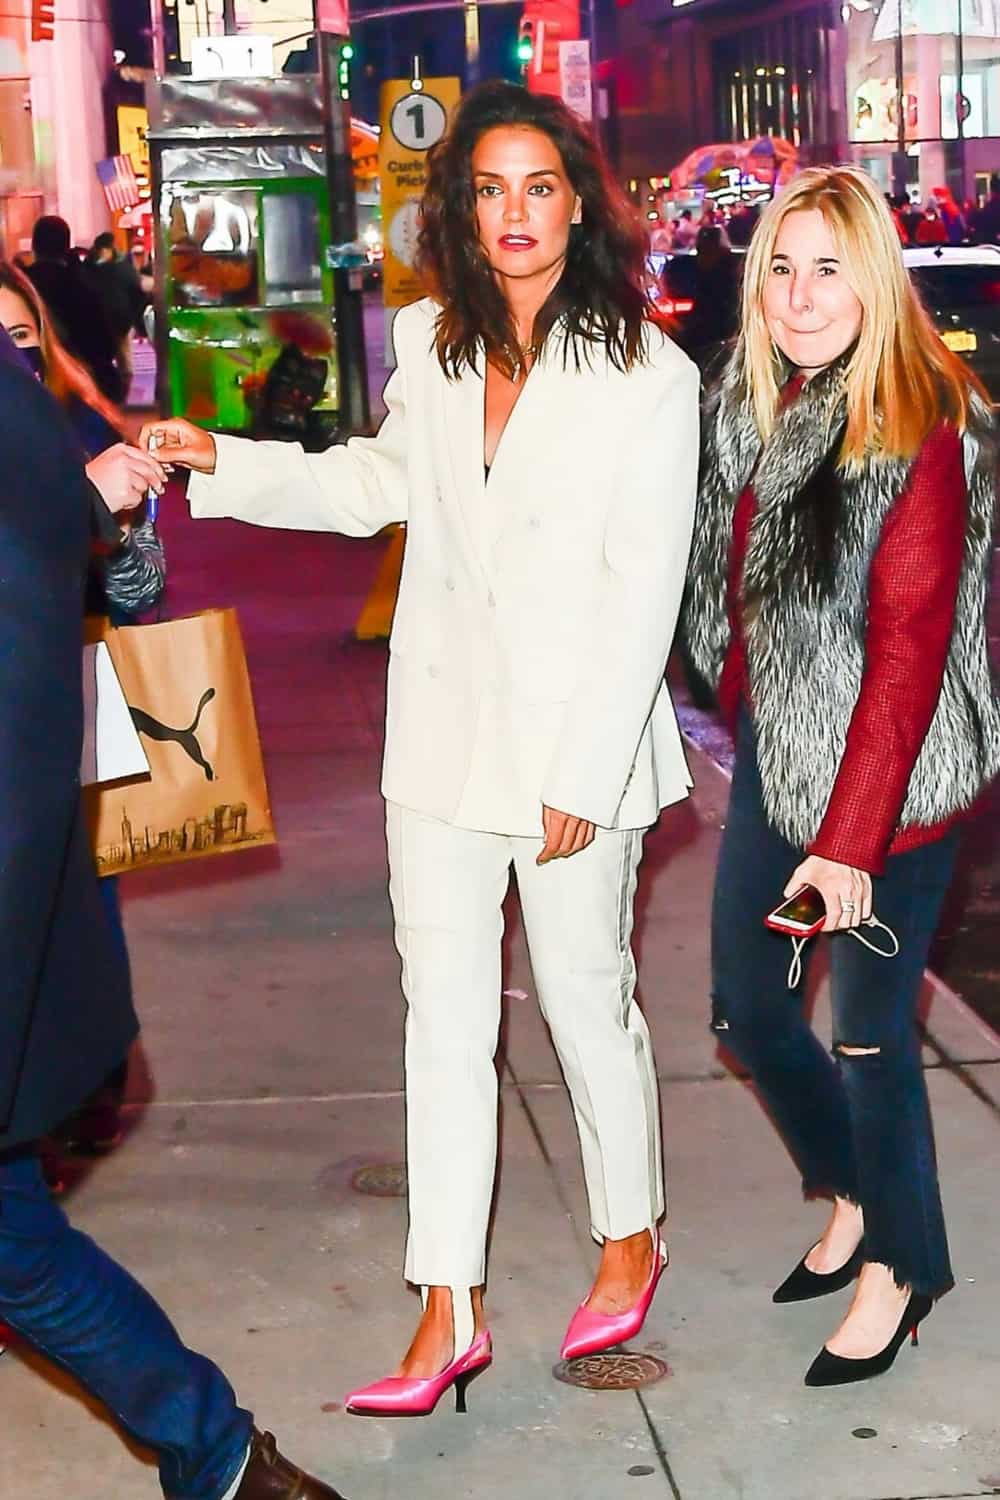 Katie Holmes Rocks a Pantsuit and Pink Heels for the RiseNY Grand Opening